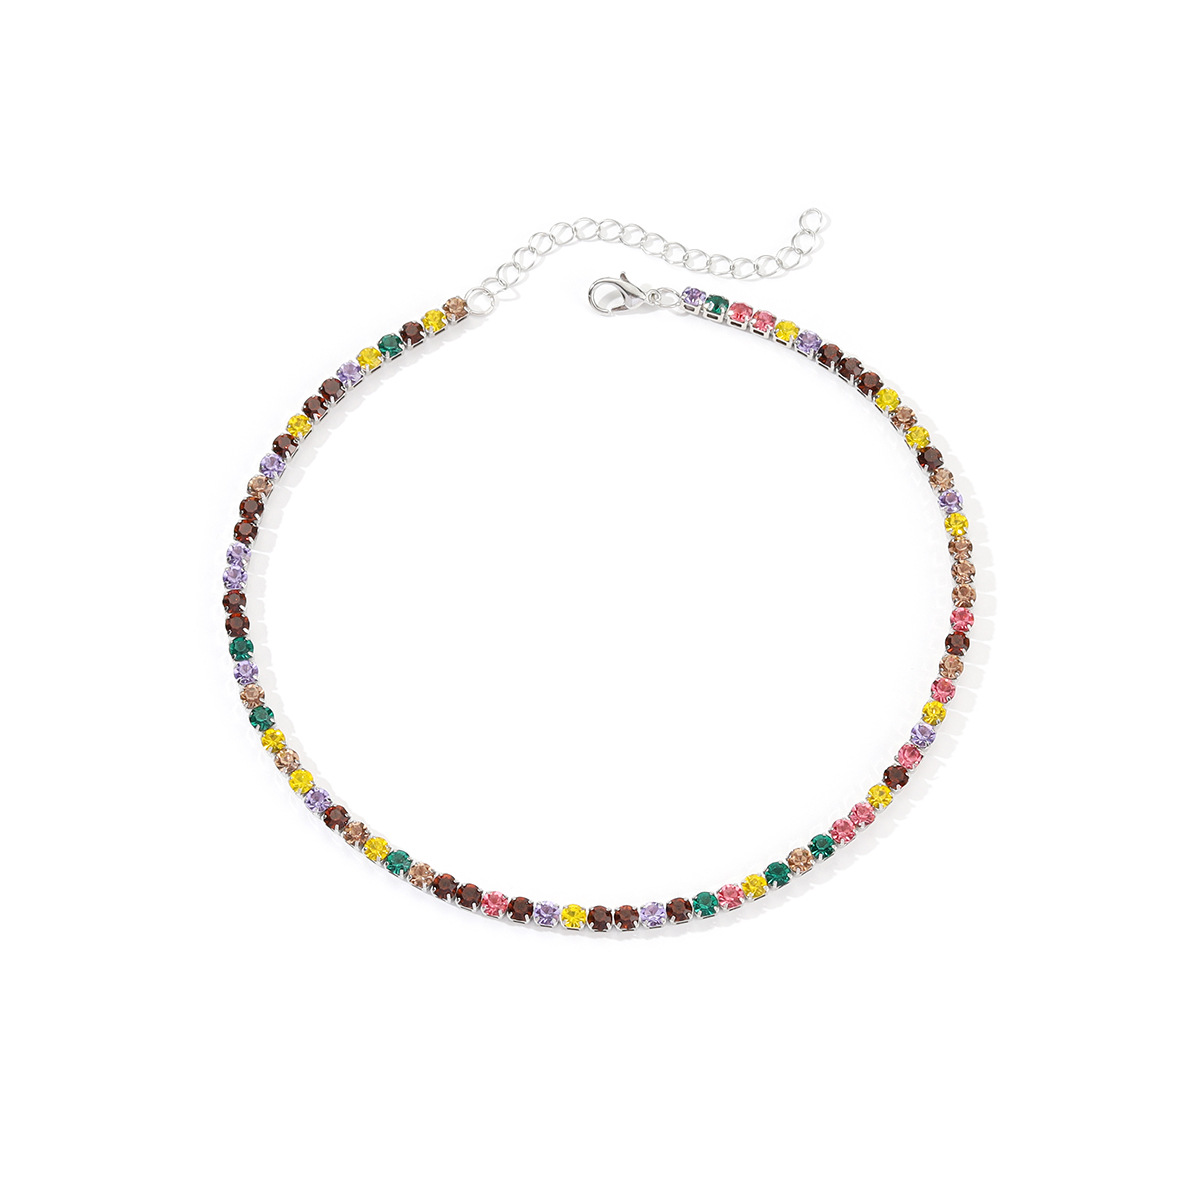 2:Colorful silver necklace